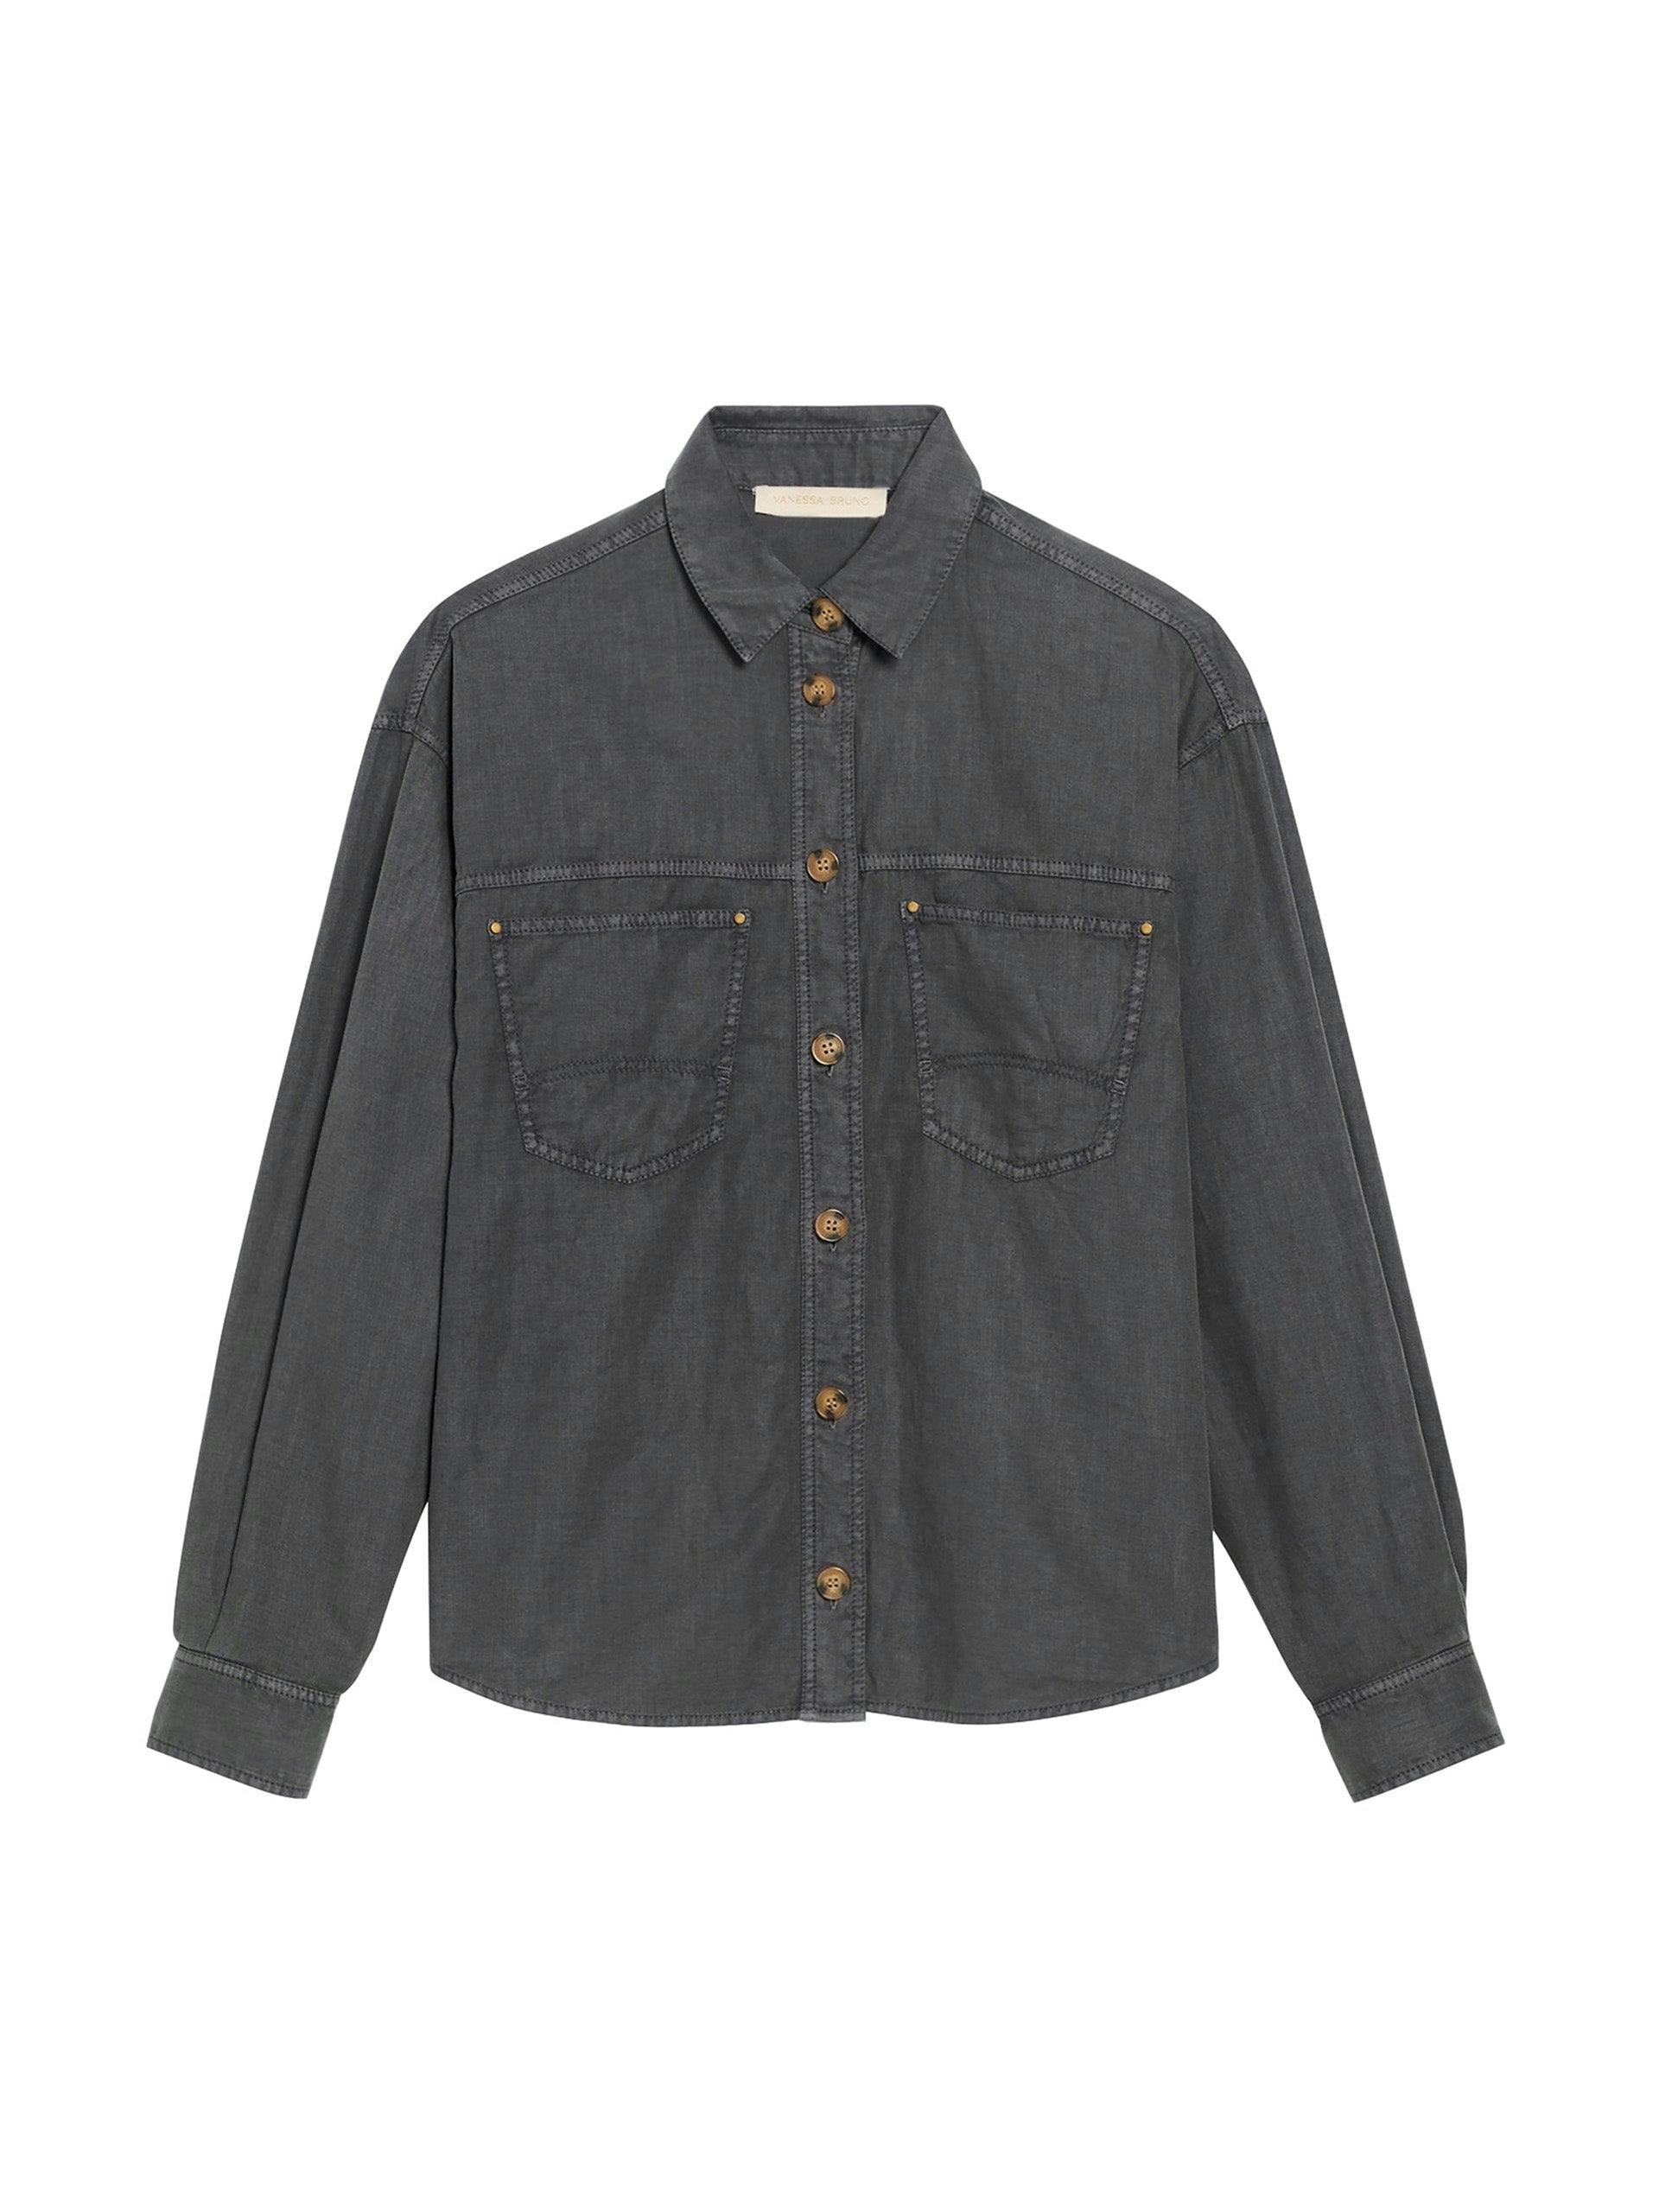 Patch pocket shirt in Anthracite